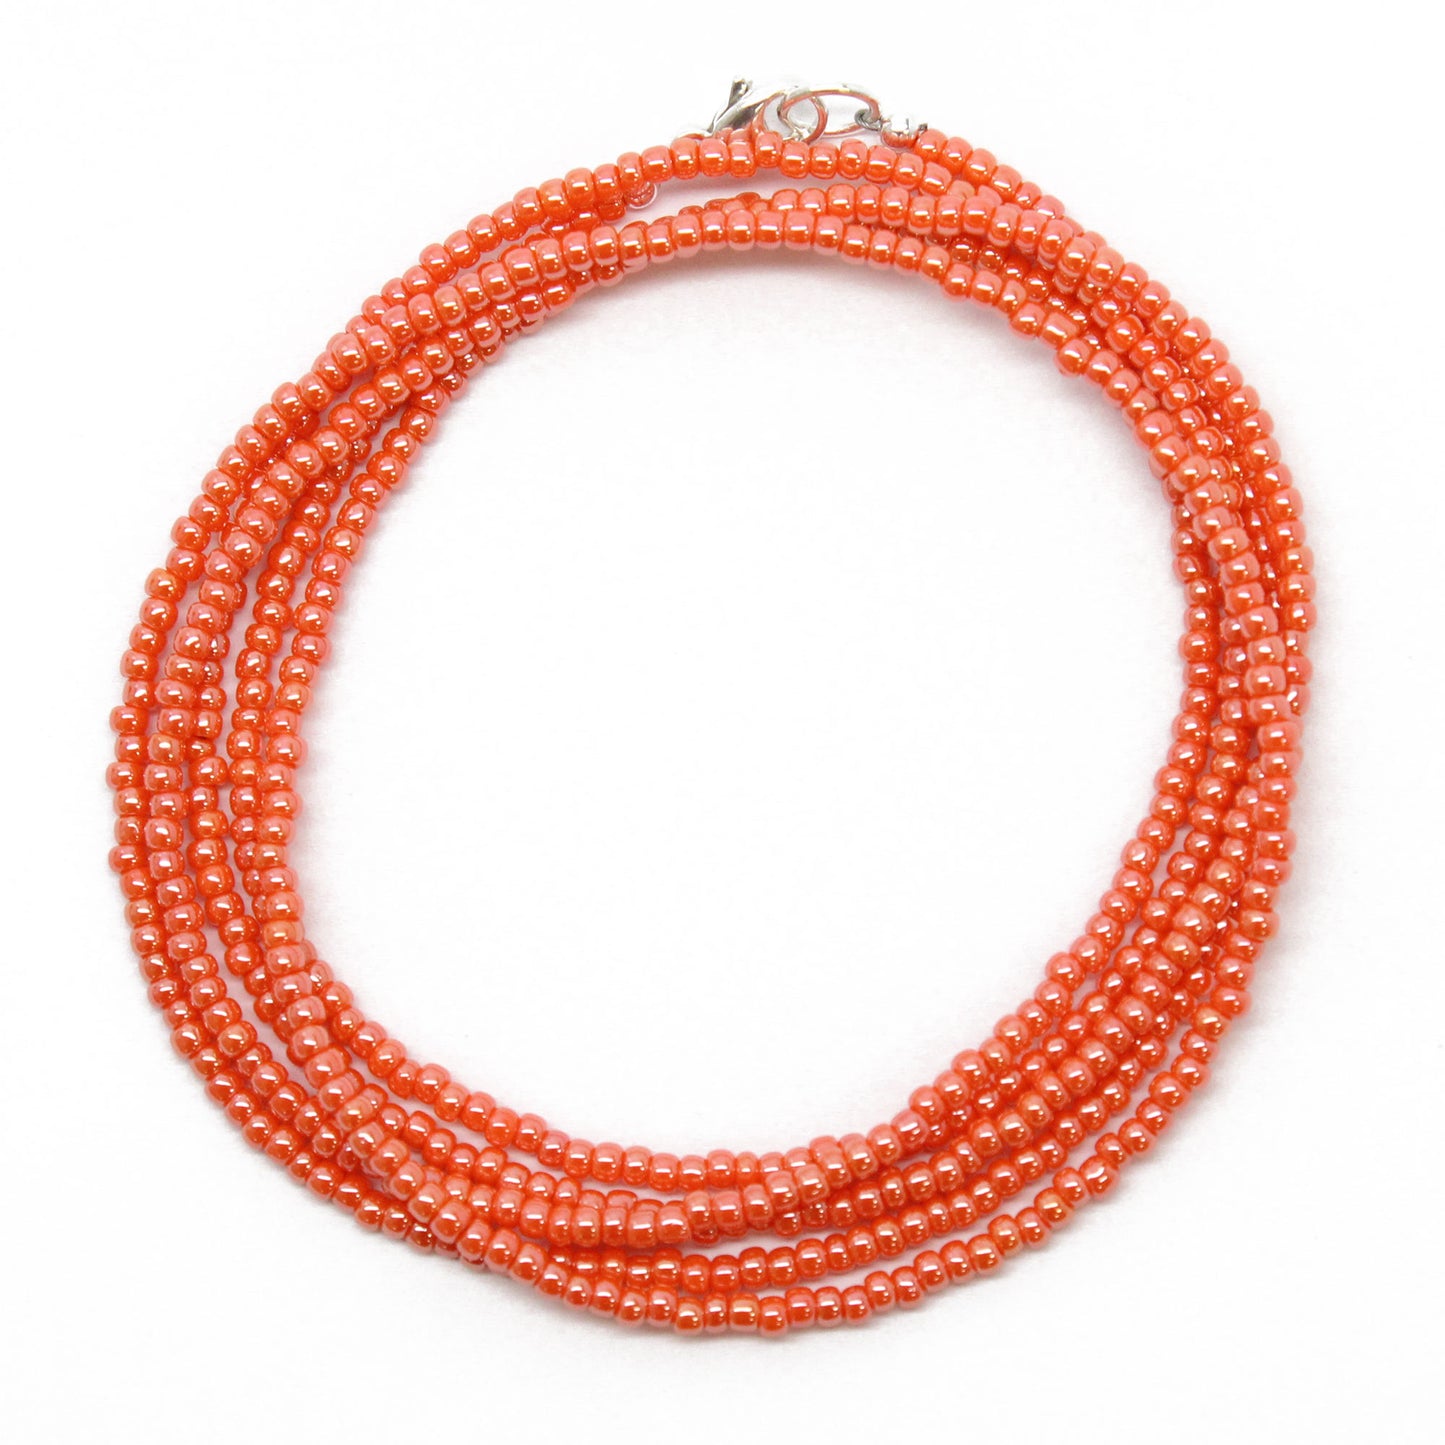 Kelechi African Authentics - African Royal Coral Bead Necklace